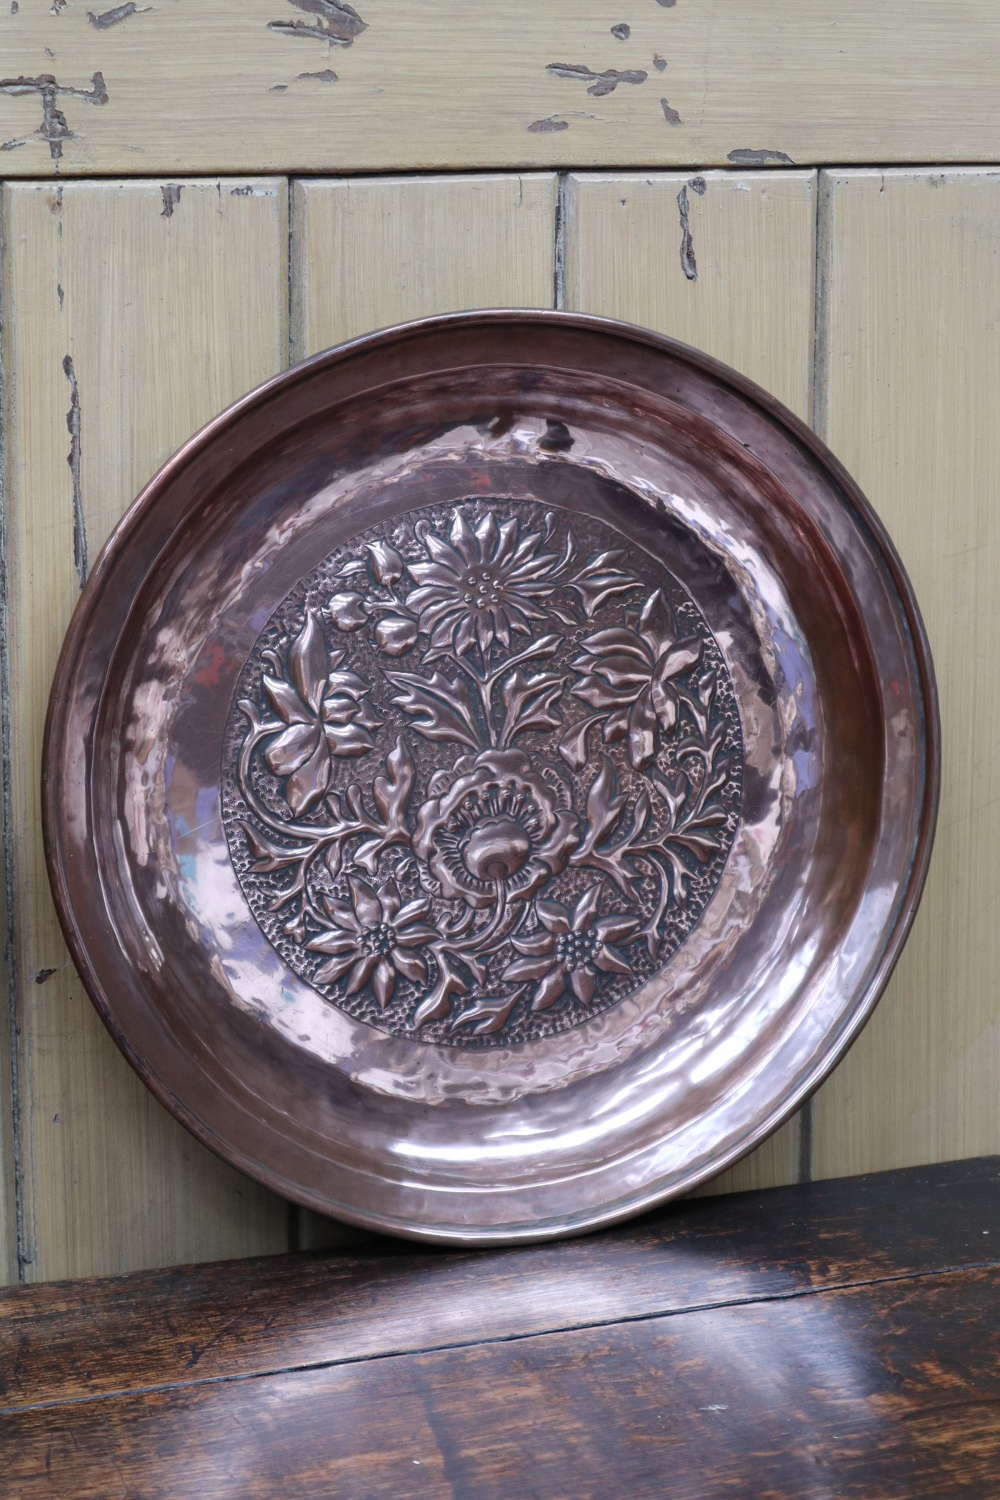 Arts & Crafts Keswick School of Industrial Art copper charger c.1905